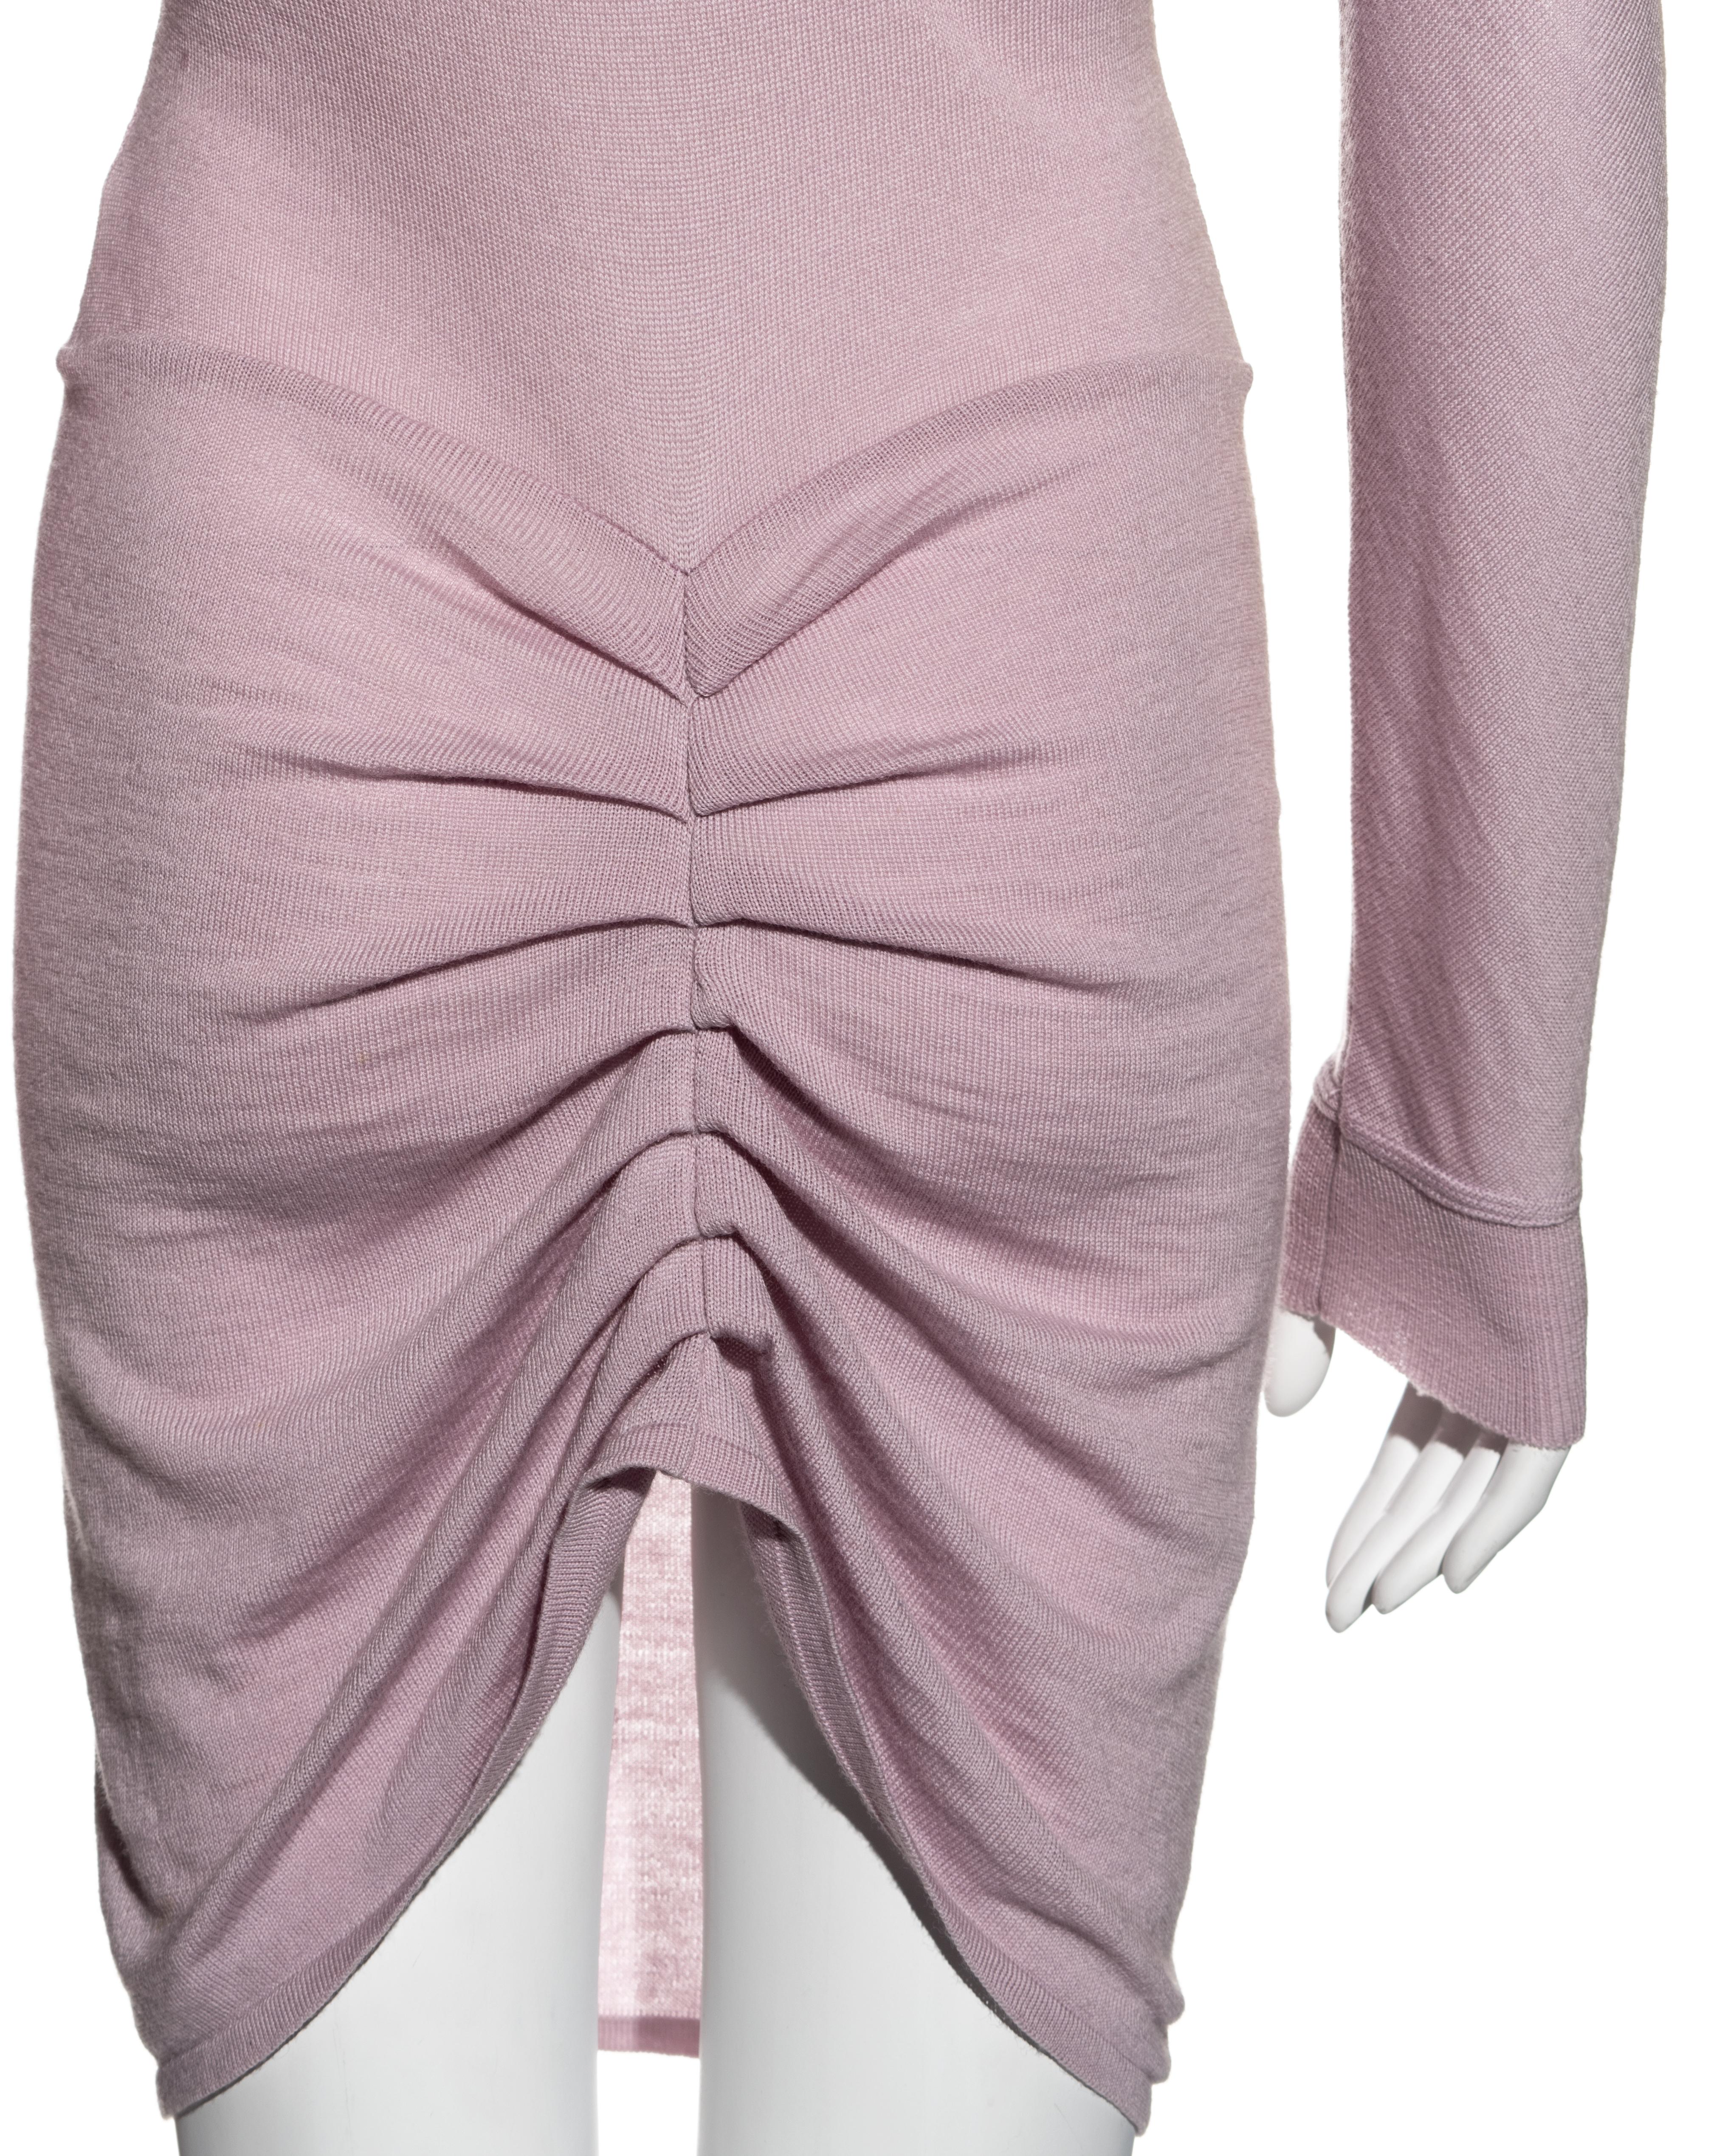 Alexander McQueen lilac wool button-up sweater dress, fw 1996 For Sale 2